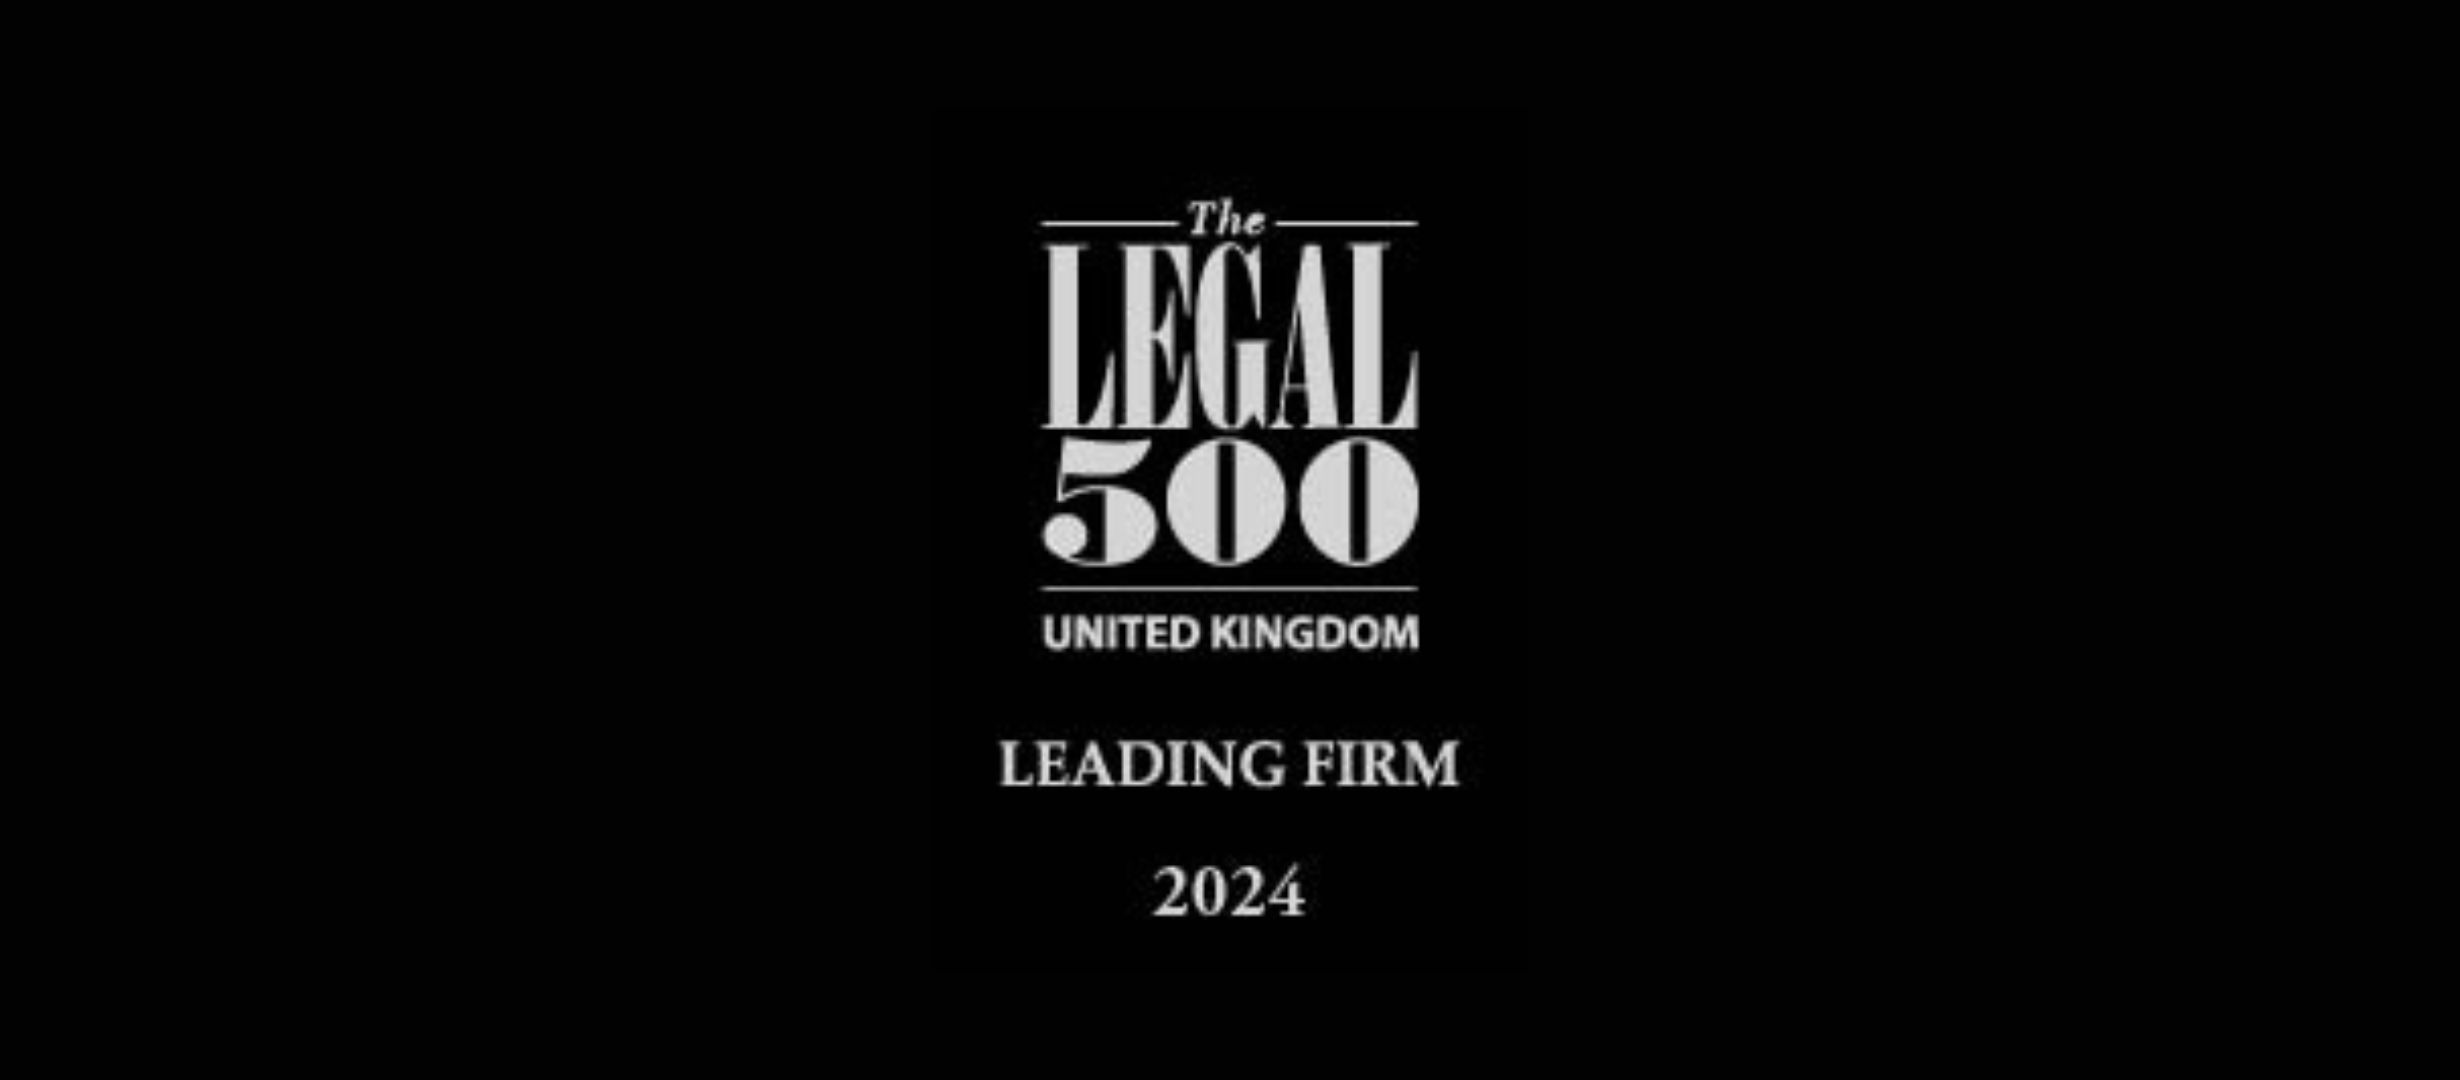 JOLLIFFES SOLICITORS IN CHESTER RETAINS LEGAL 500 LISTING FOR 2024